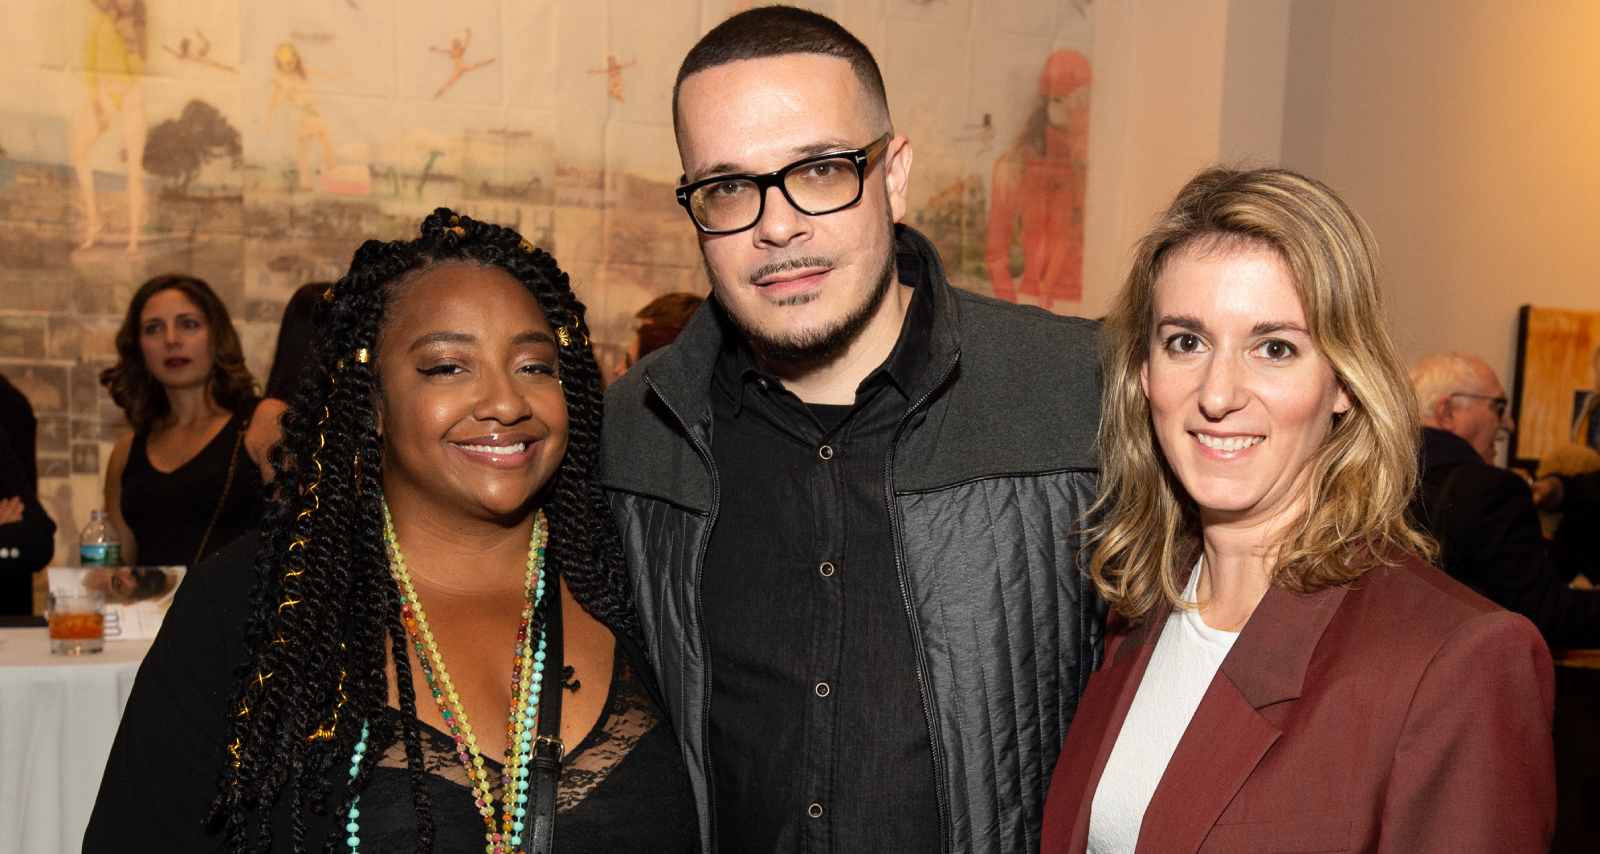 Rai King Wiki, Age, Education, Career, Kids and Facts About Shaun King’s WIfe